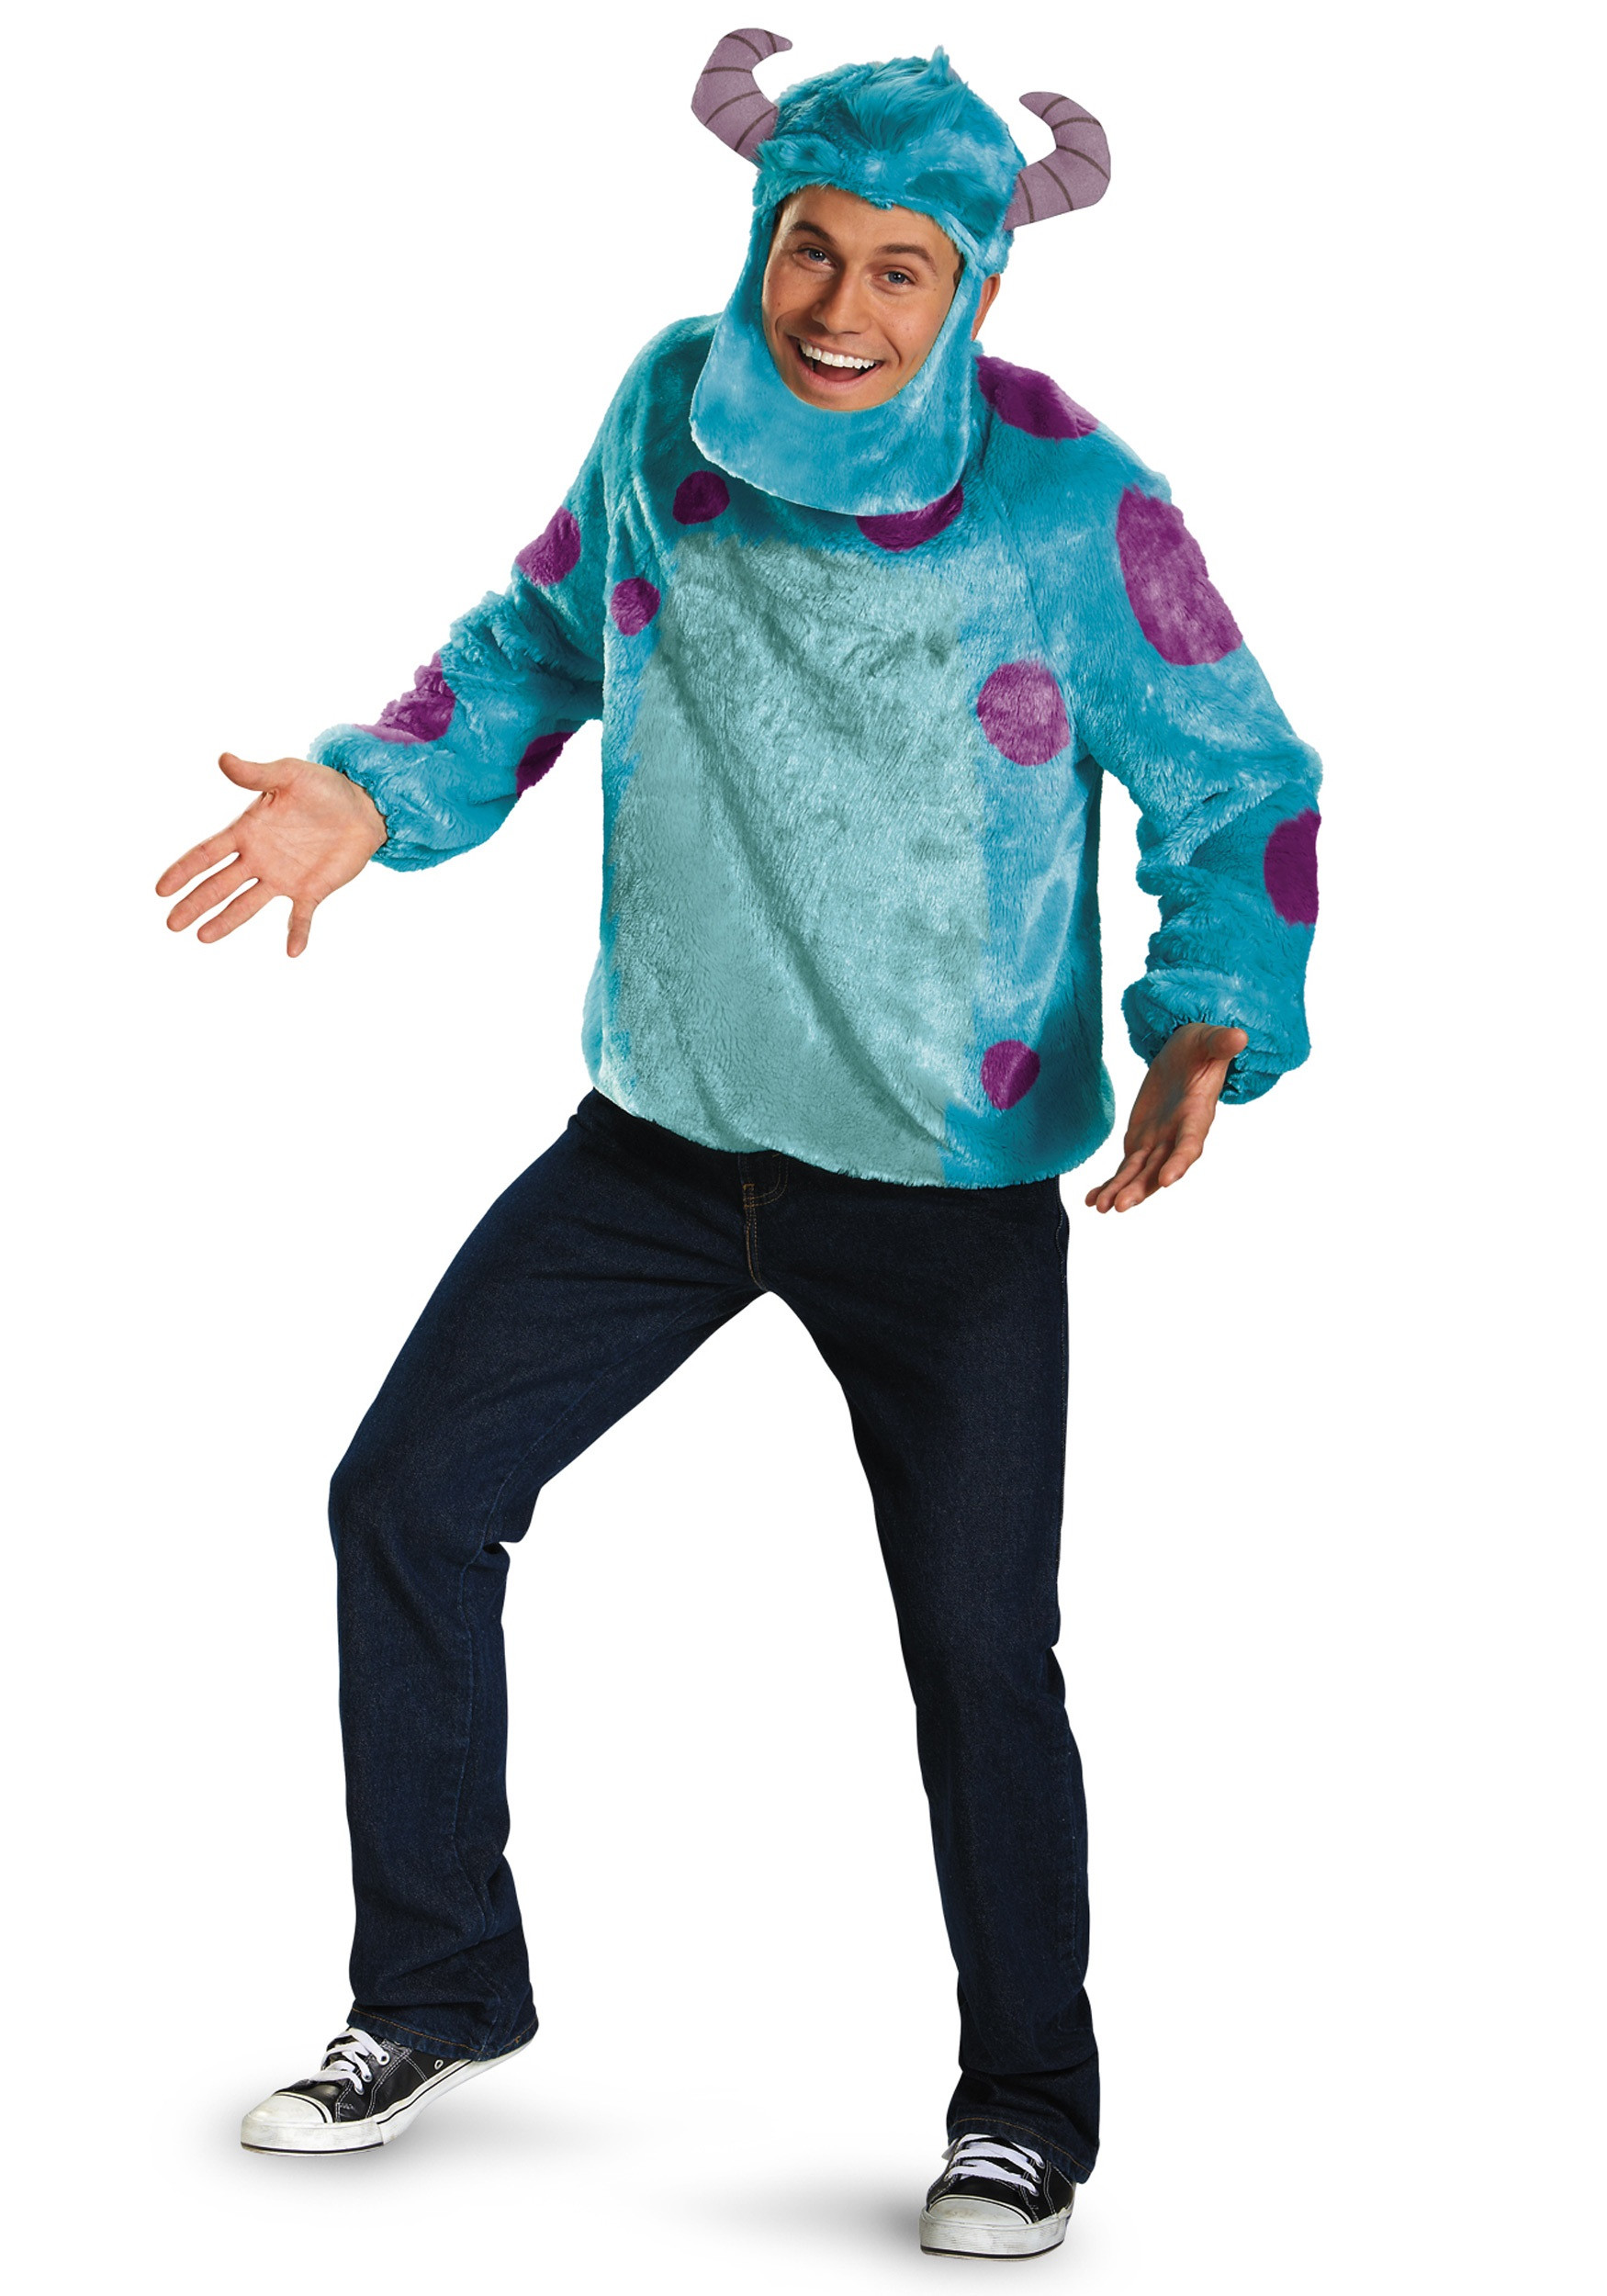 Sully Monsters Inc Costume DIY
 Monsters Inc Deluxe Adult Sulley Costume